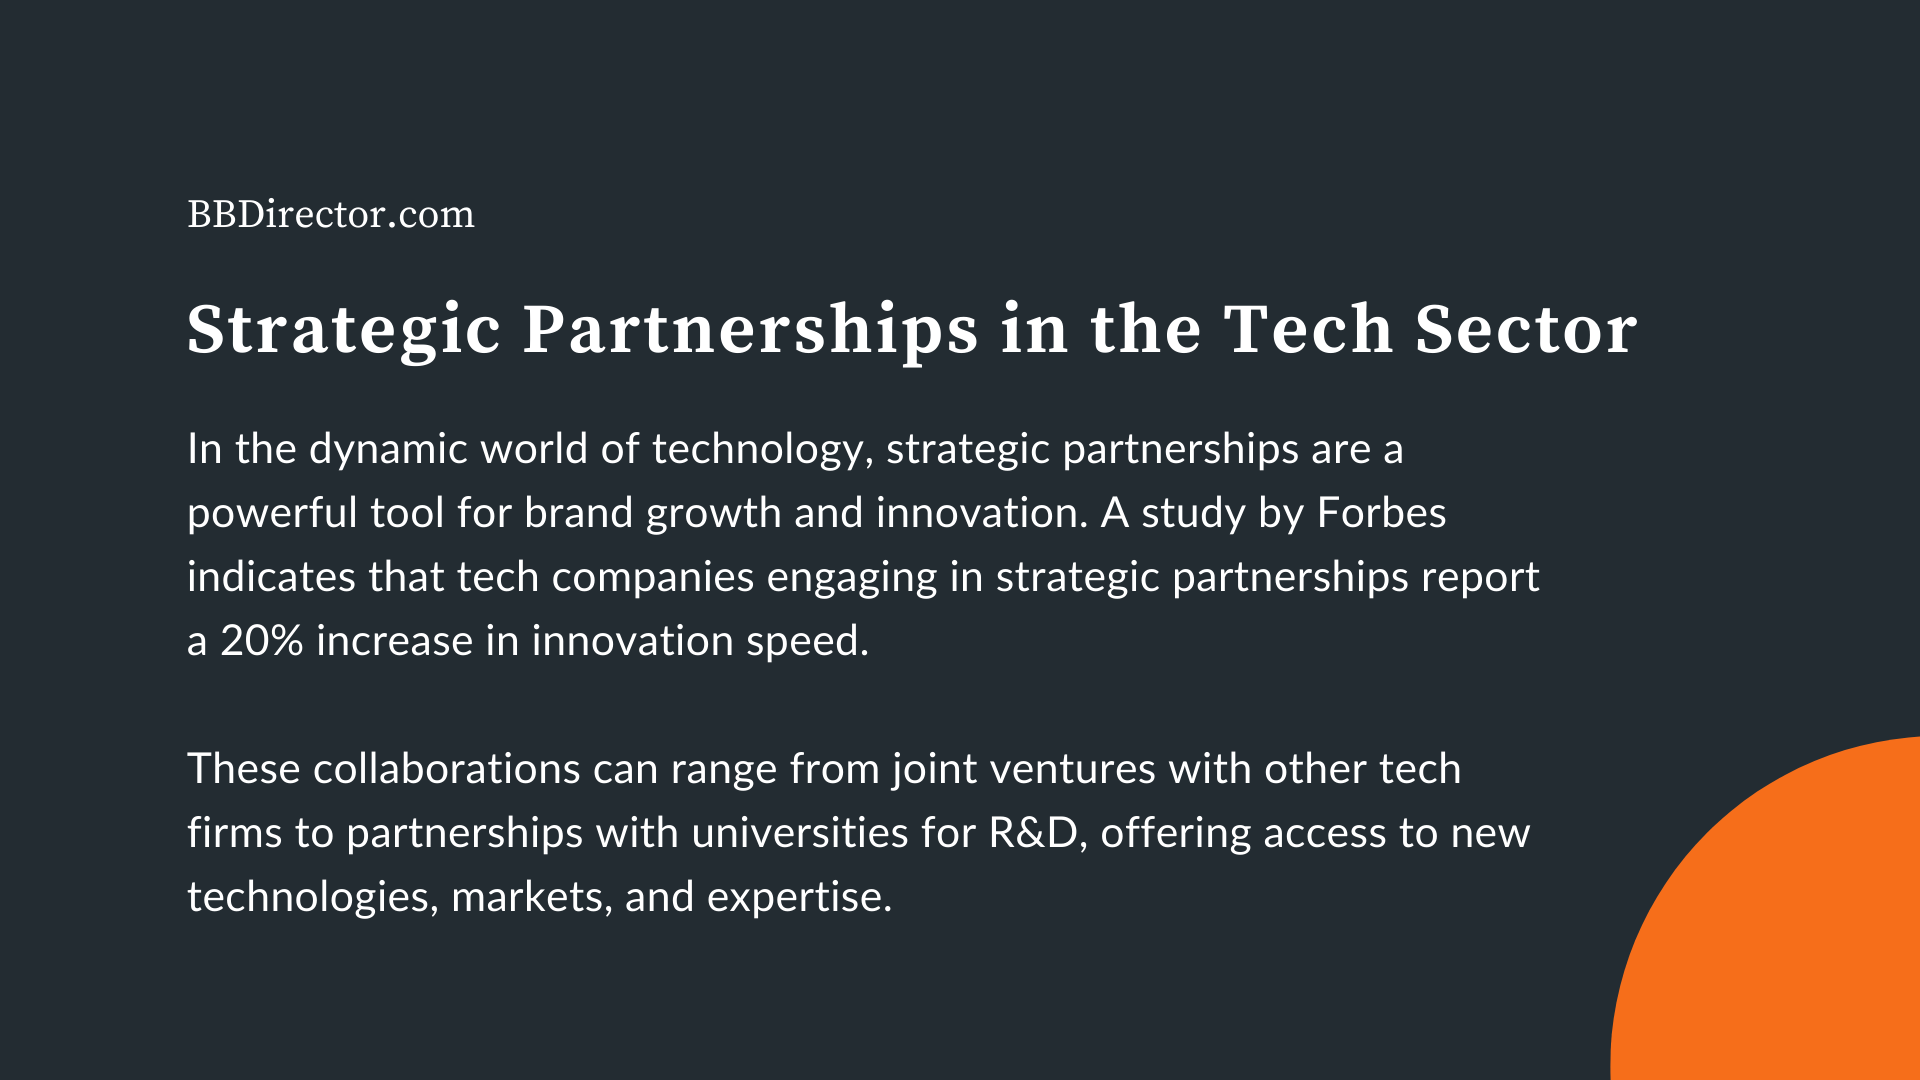 Strategic Partnerships in the Tech Sector